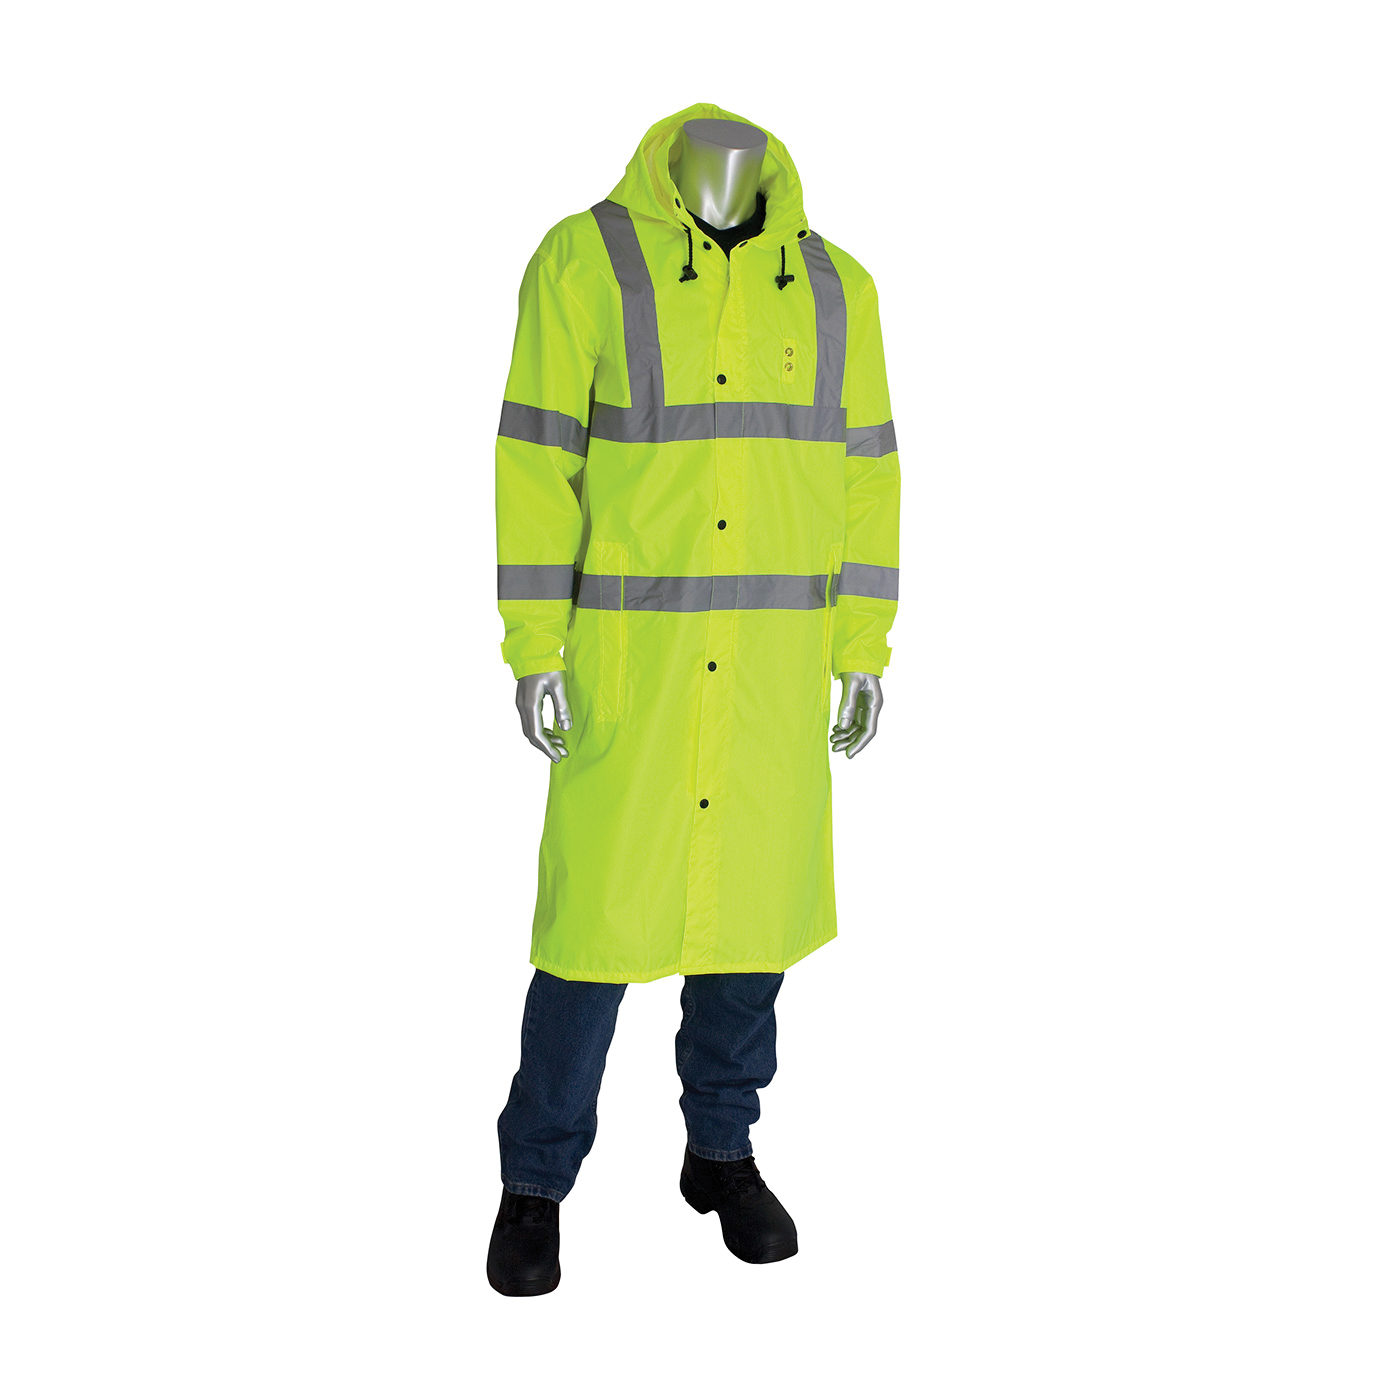 PIP® FALCON™ Viz™ 353-1048-LY/5X All Purpose Waterproof Rain Coat, 5XL, Hi-Viz Lime Yellow, 150D Polyester Coated with Polyurethane, Resists: Water, ANSI 107 Type R Class 3, Concealed Hood